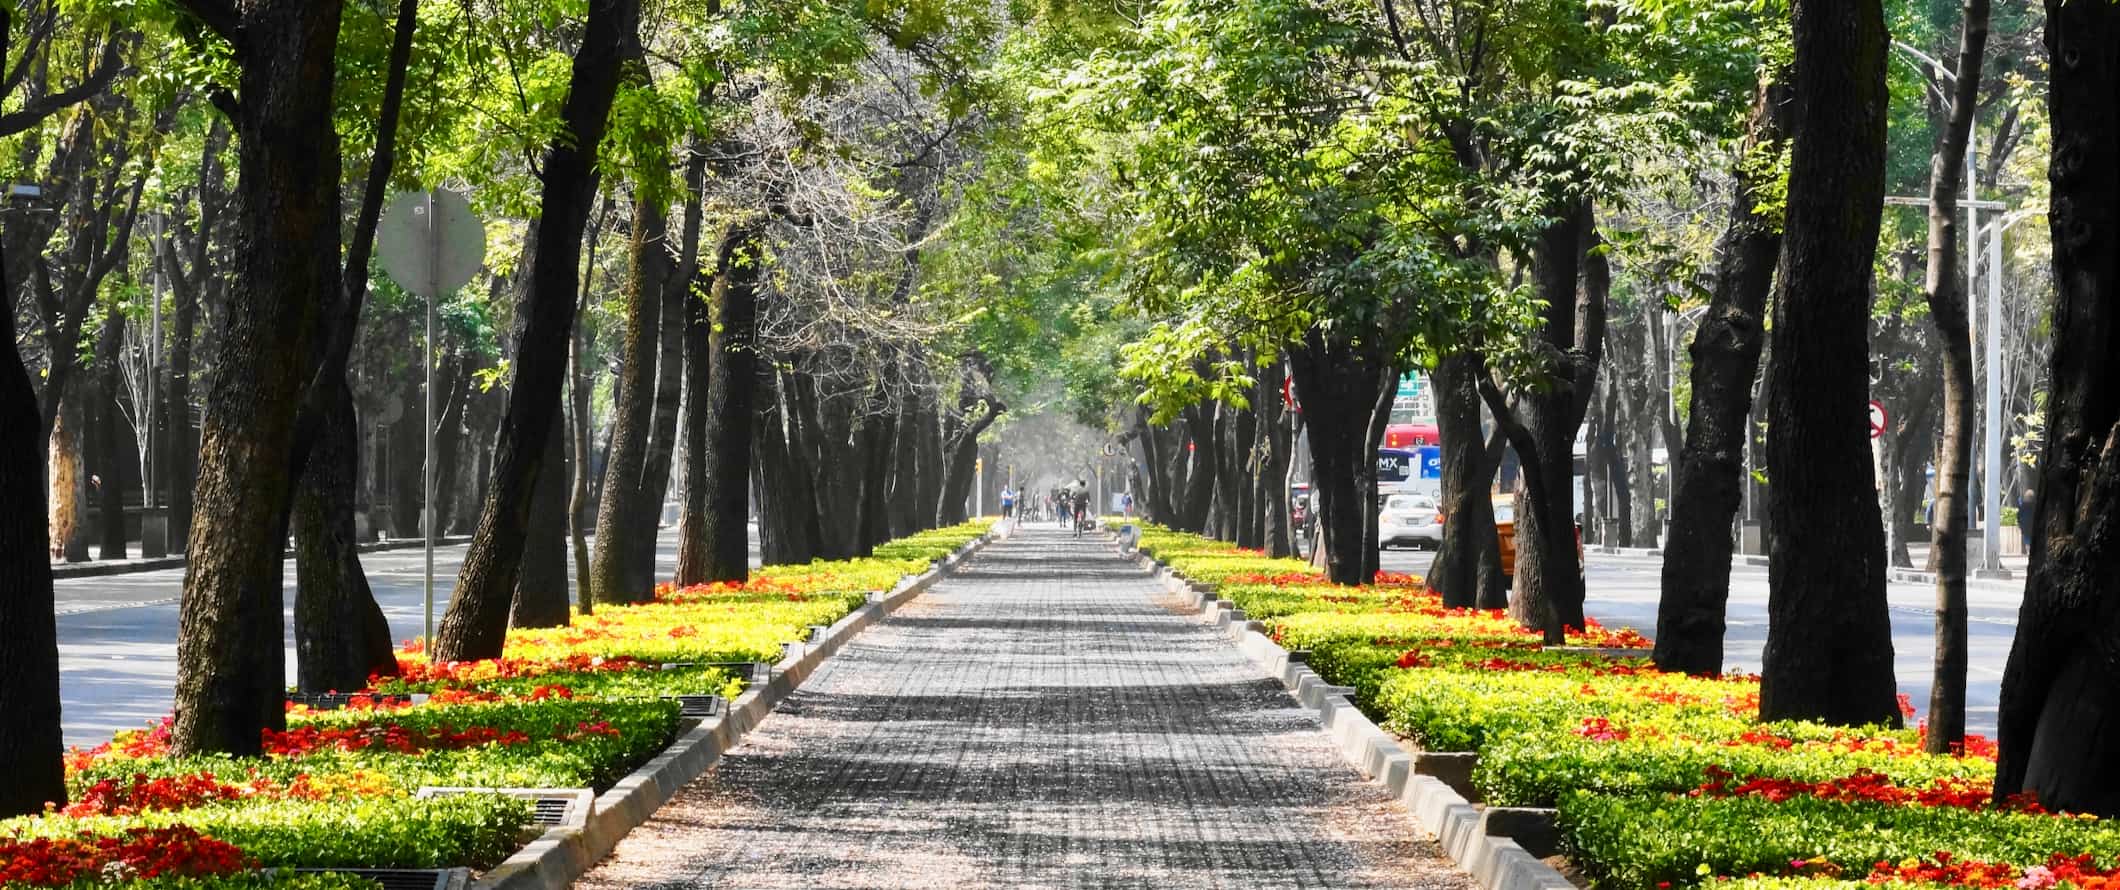 A tree-lined walking path in bustling Mexico City, Mexico